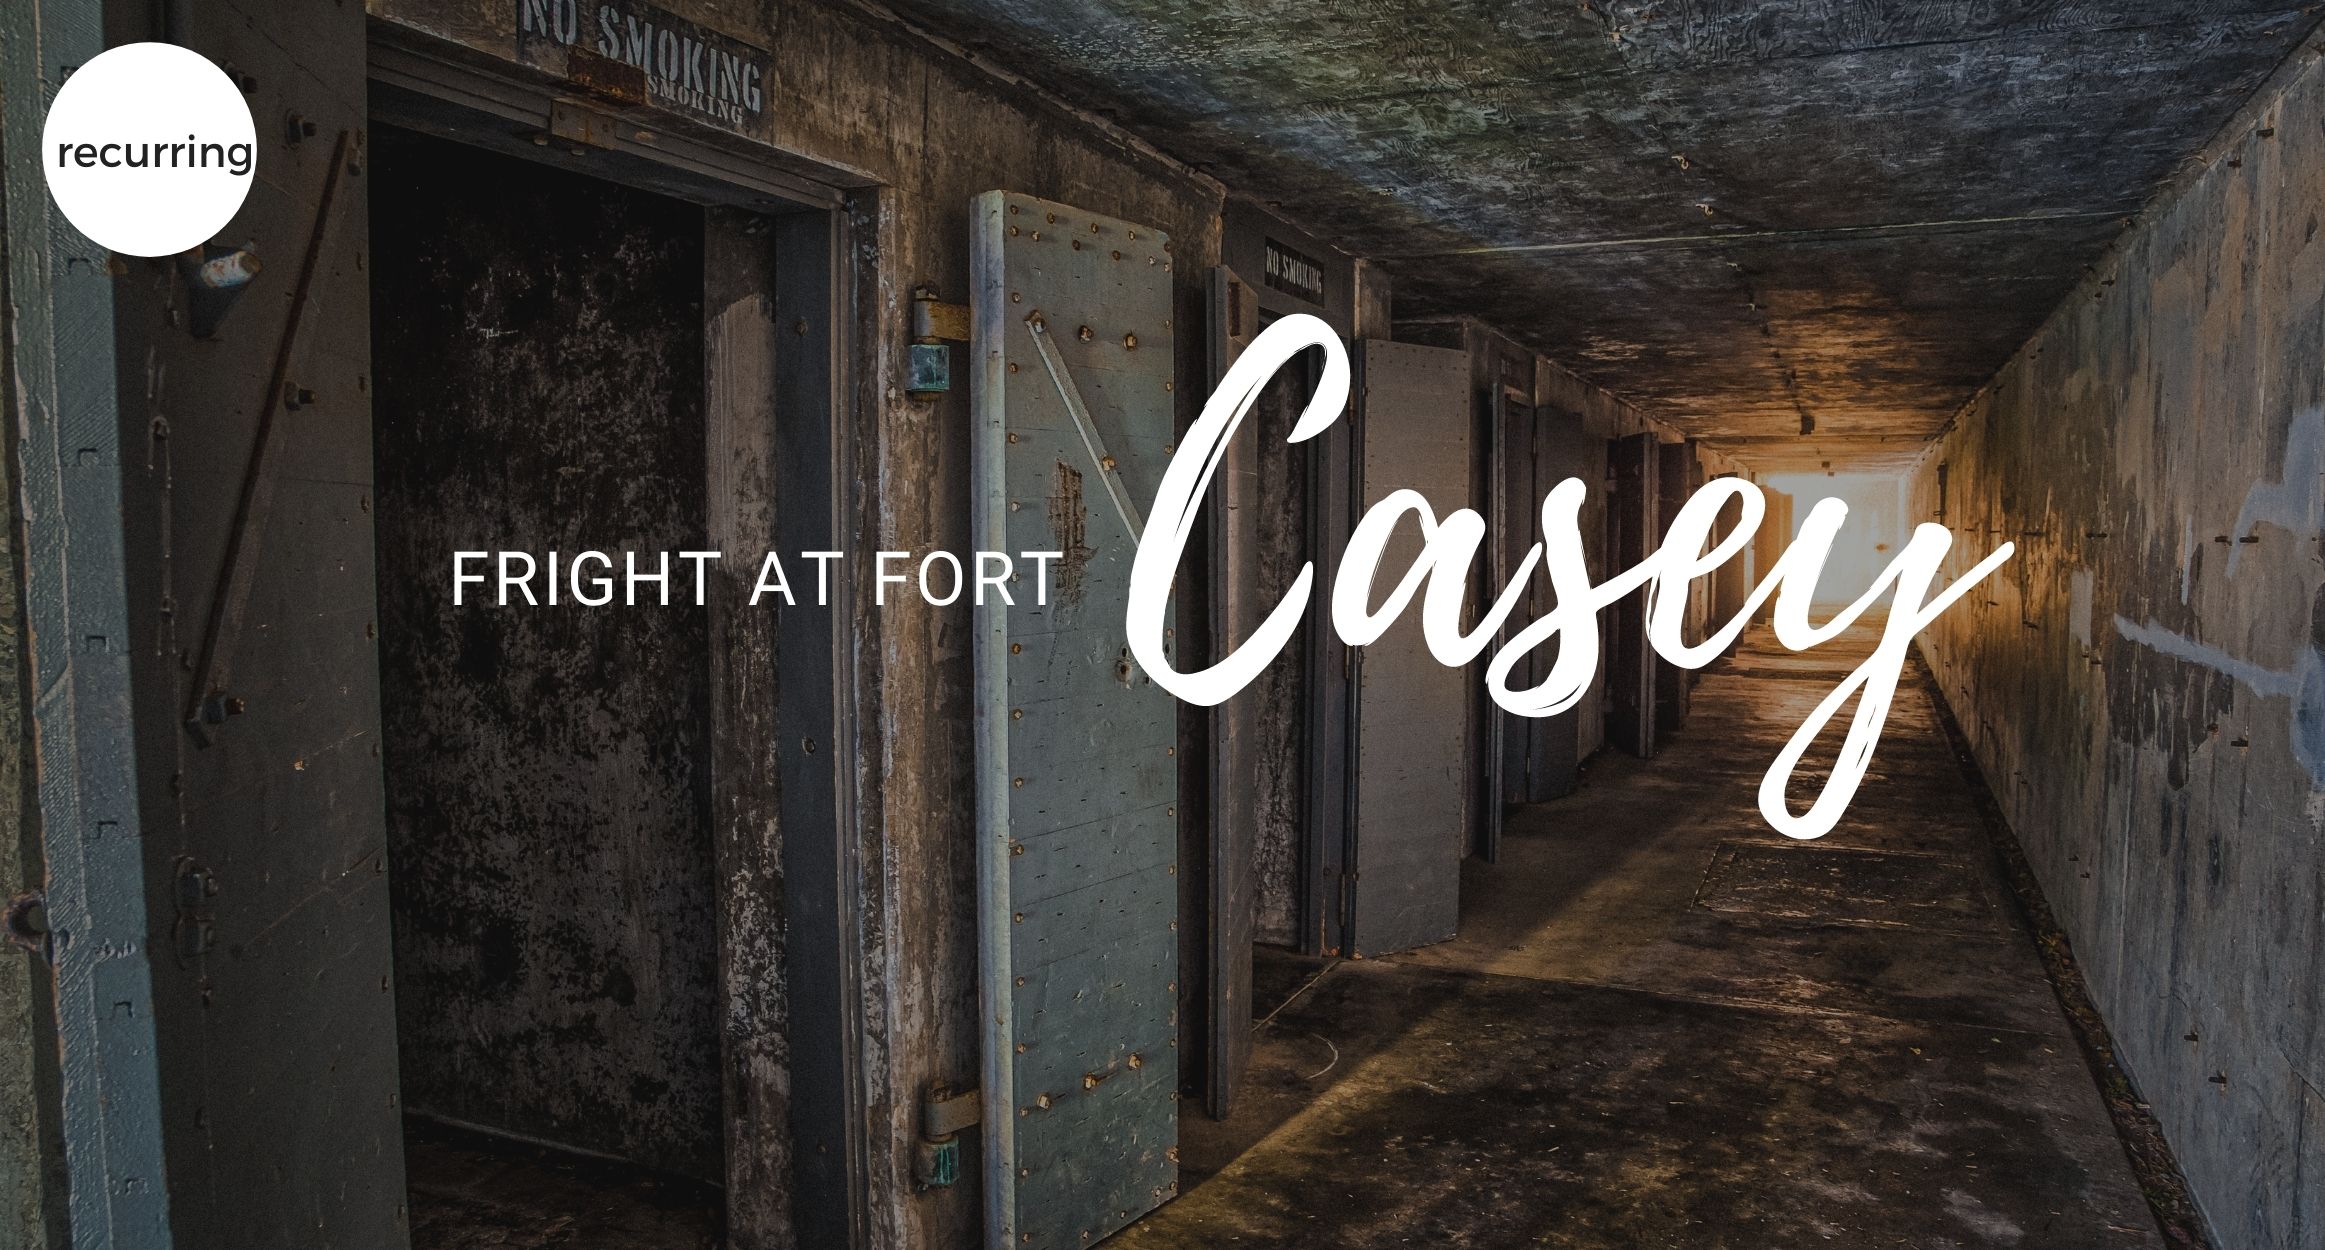 "A Fright at Fort Casey" State Park